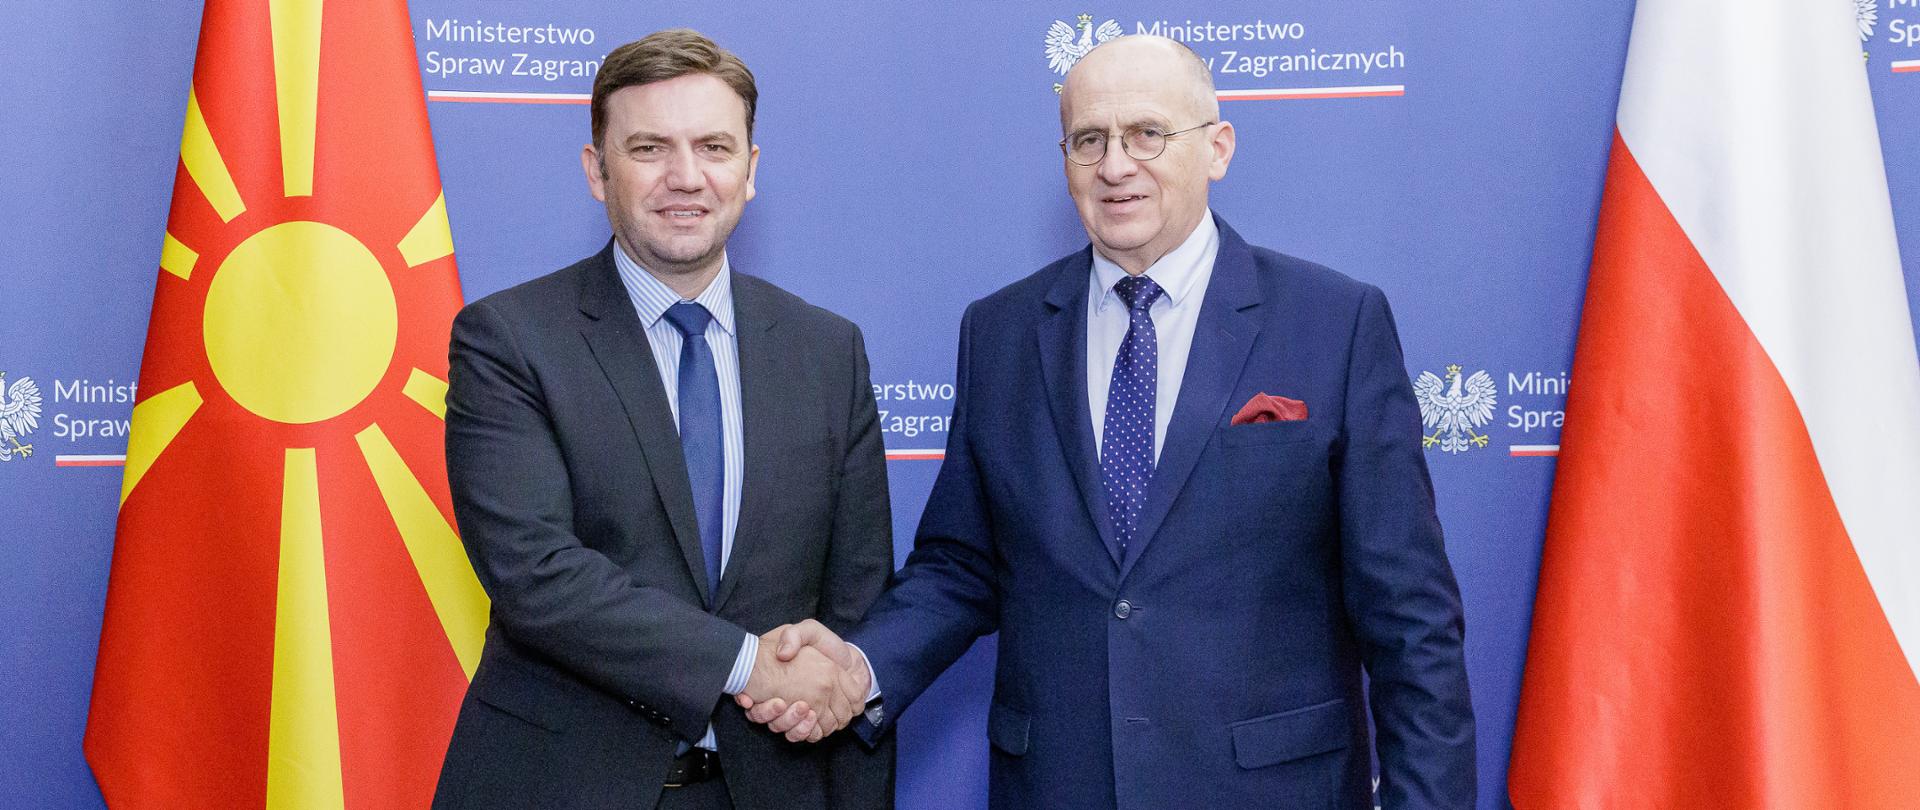 Minister Zbigniew Rau meets with his counterpart from North Macedonia